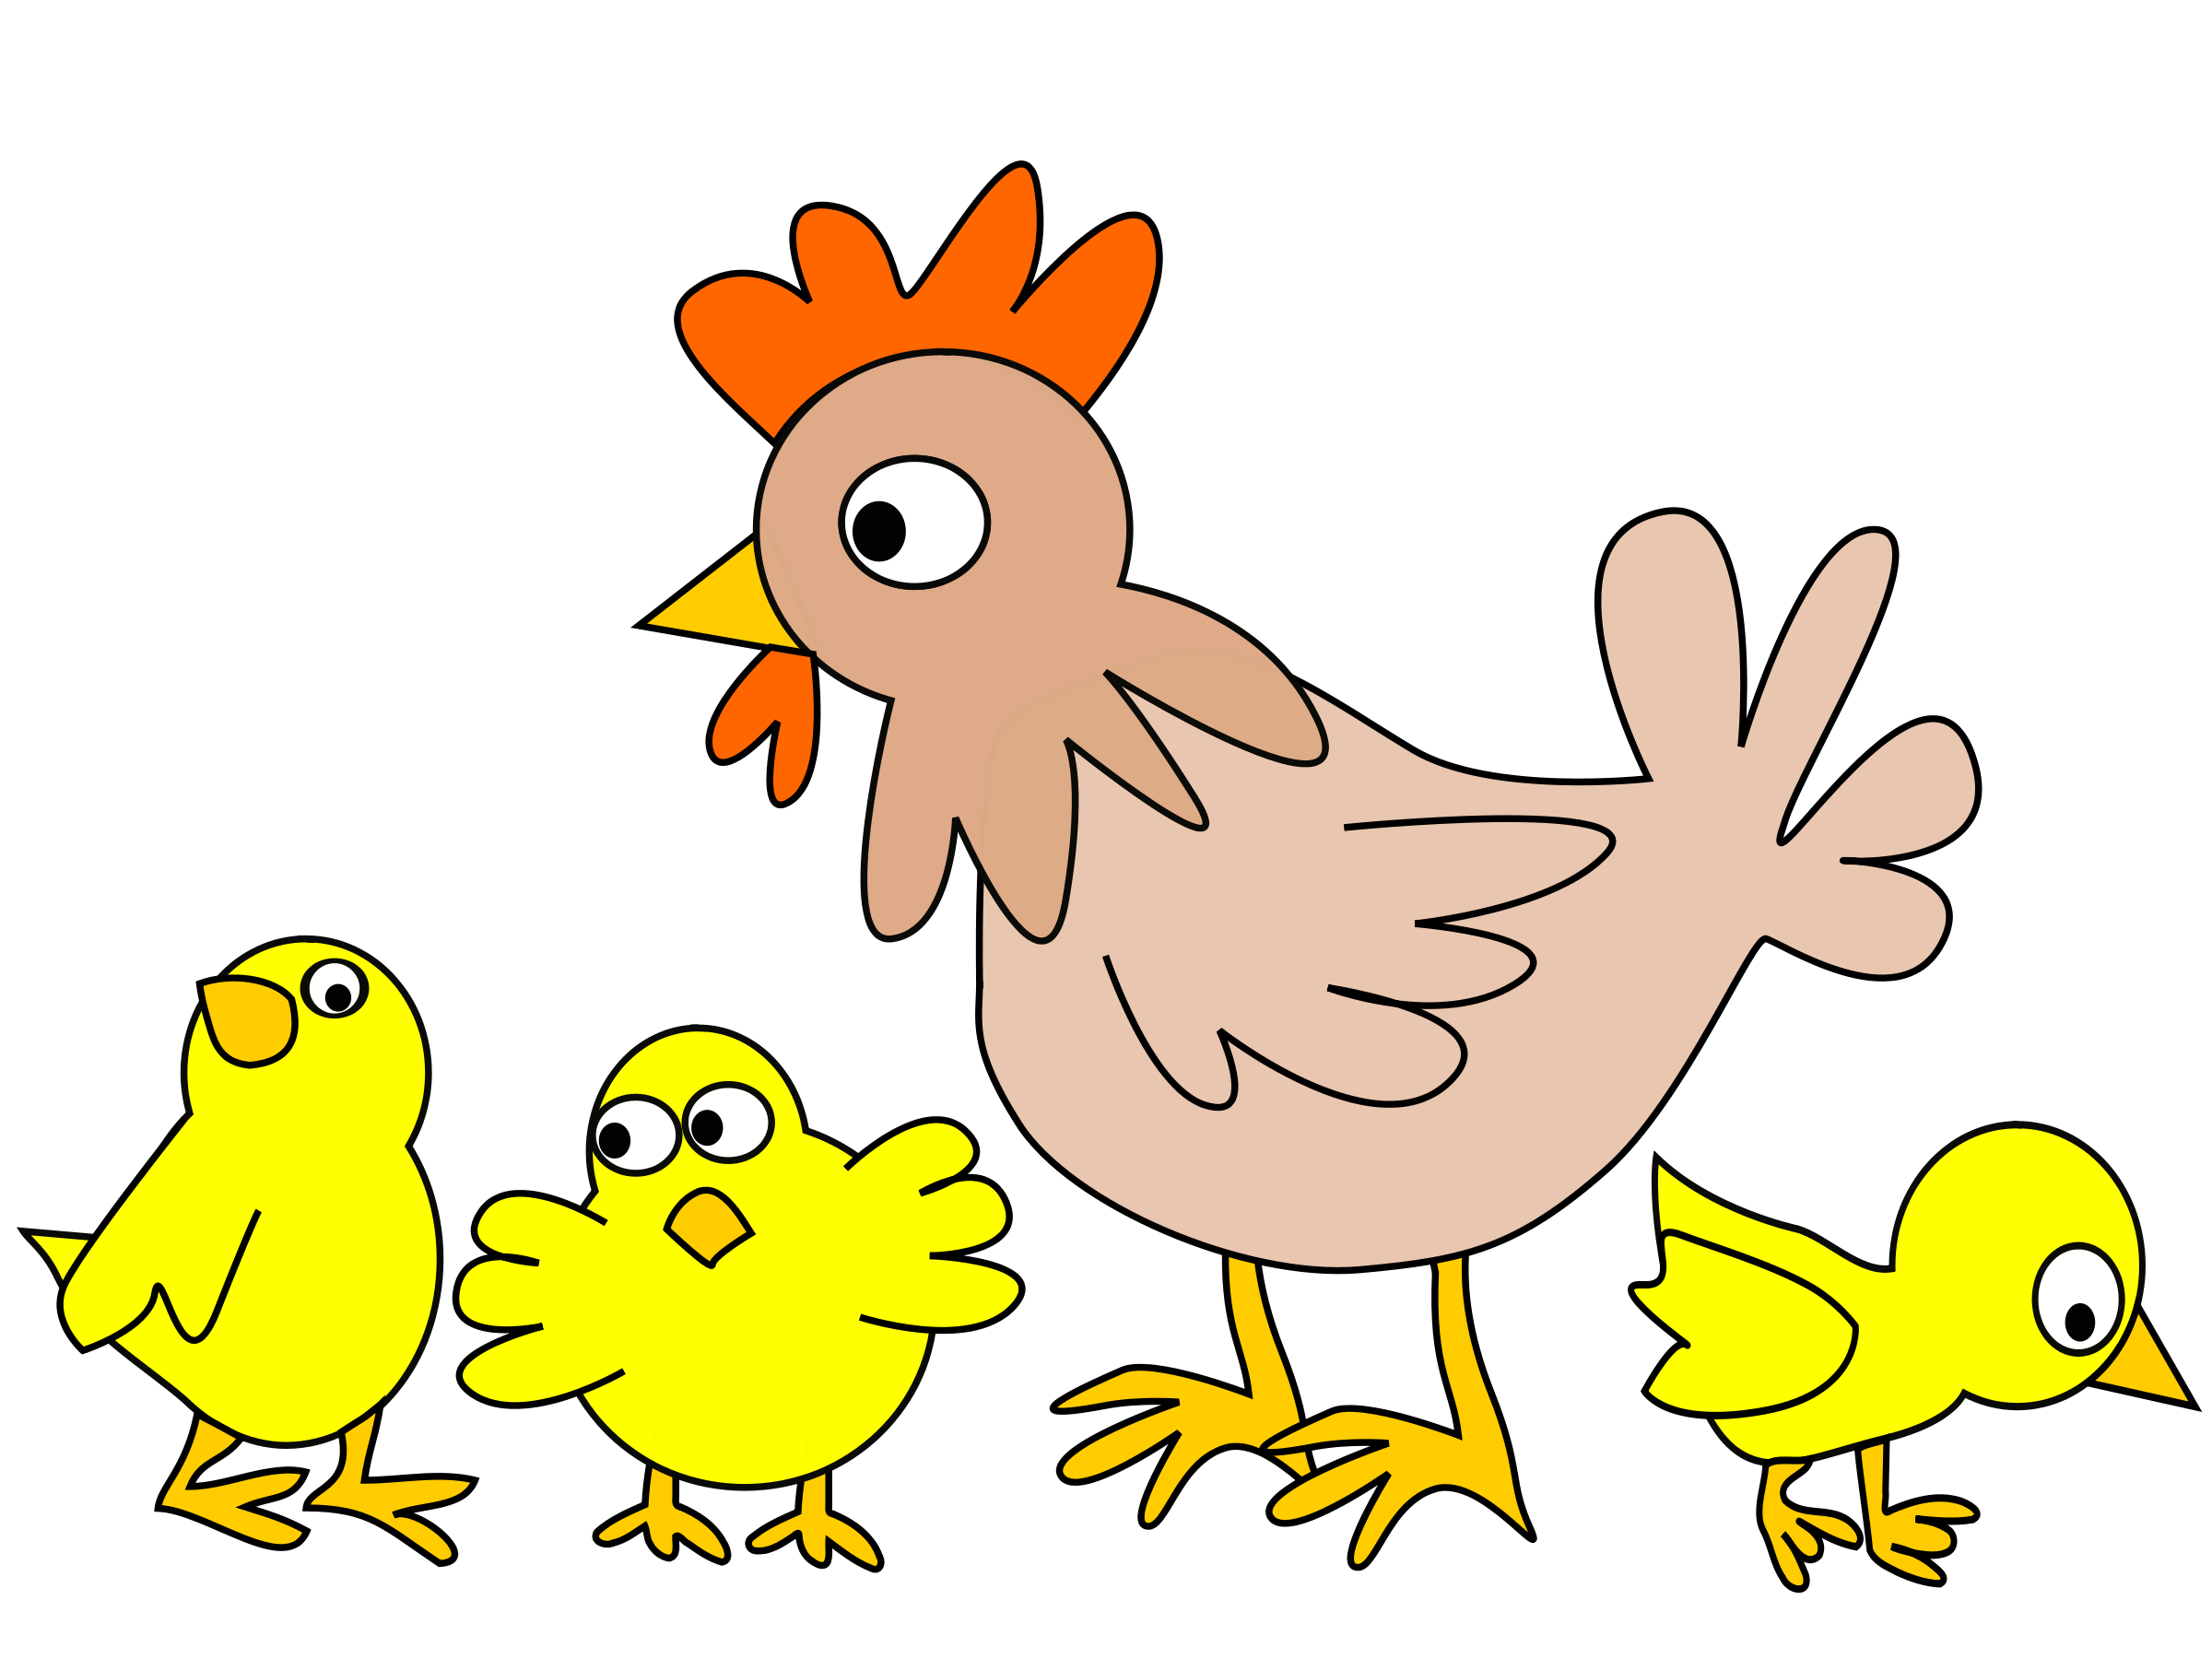 Mother clipart chicken. Egg panda free images